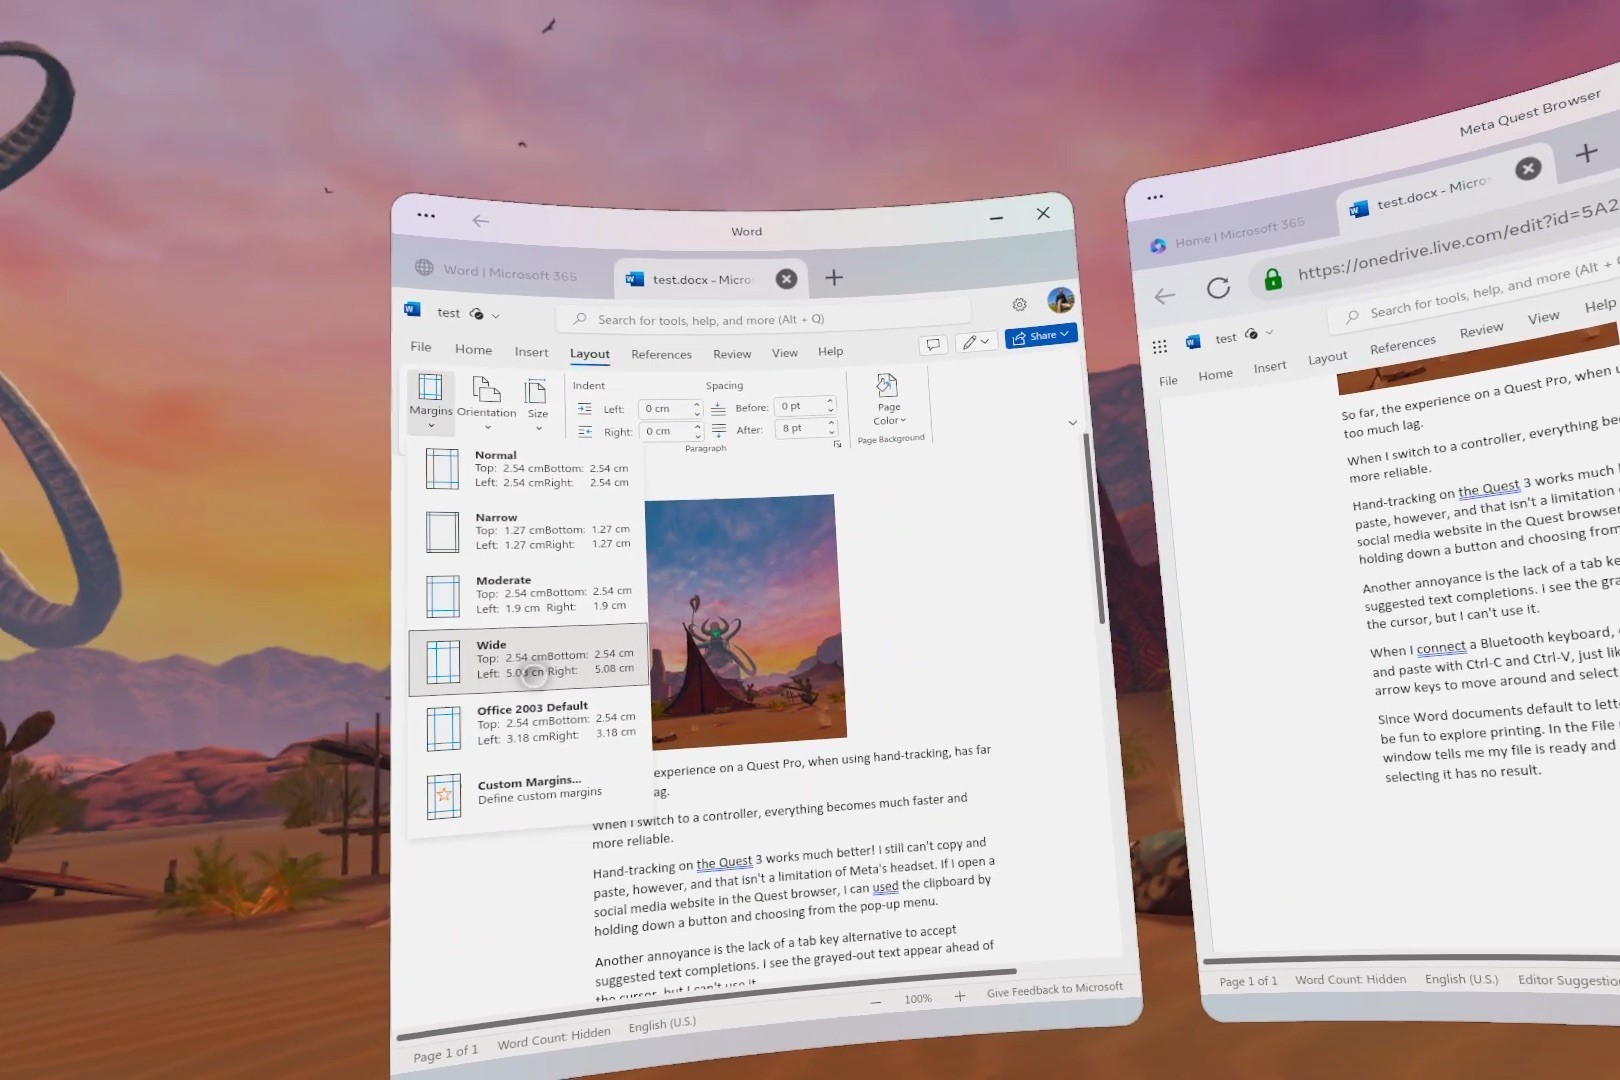 Most features, like adjusting a document’s layout in Word, work fine on a Quest 3.